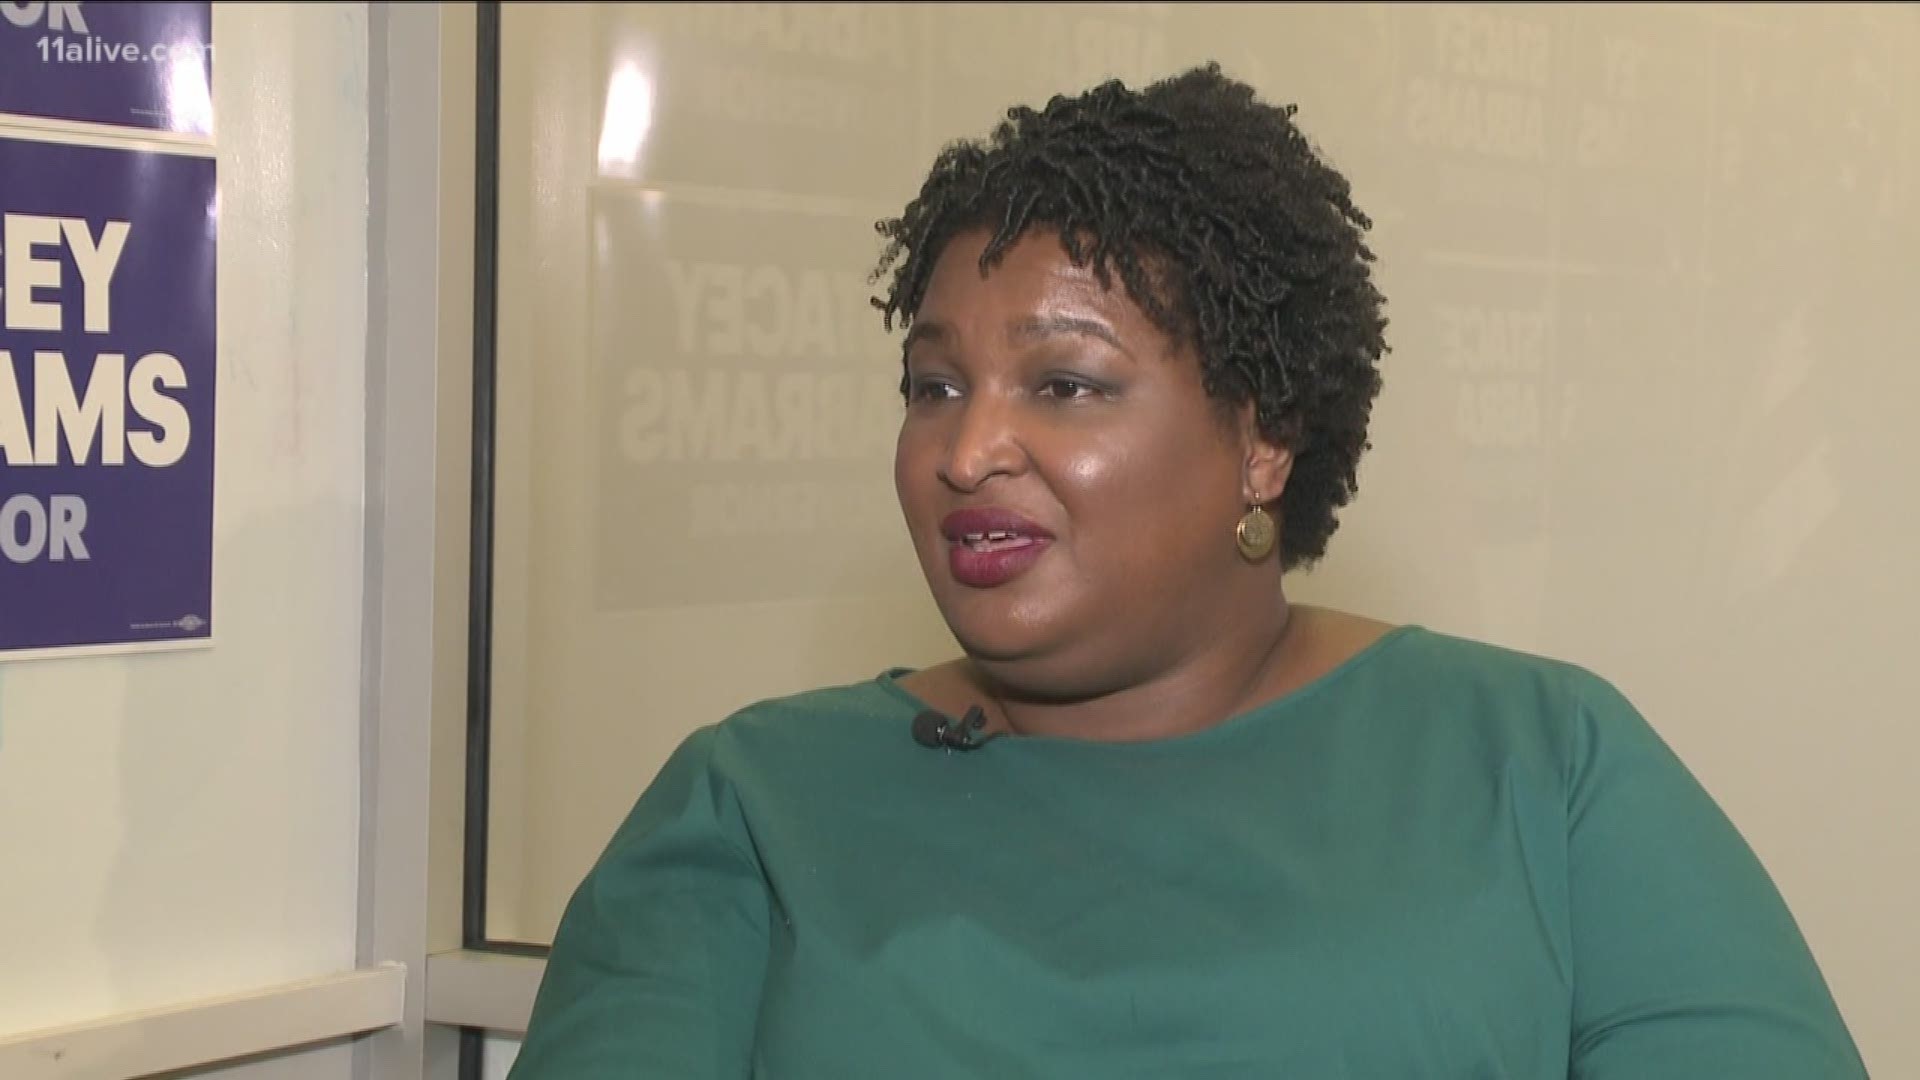 Abrams sat down with 11Alive just one day after stepping out of the race for governor - and making a fiery speech about the actions of her opponent, Brian Kemp.